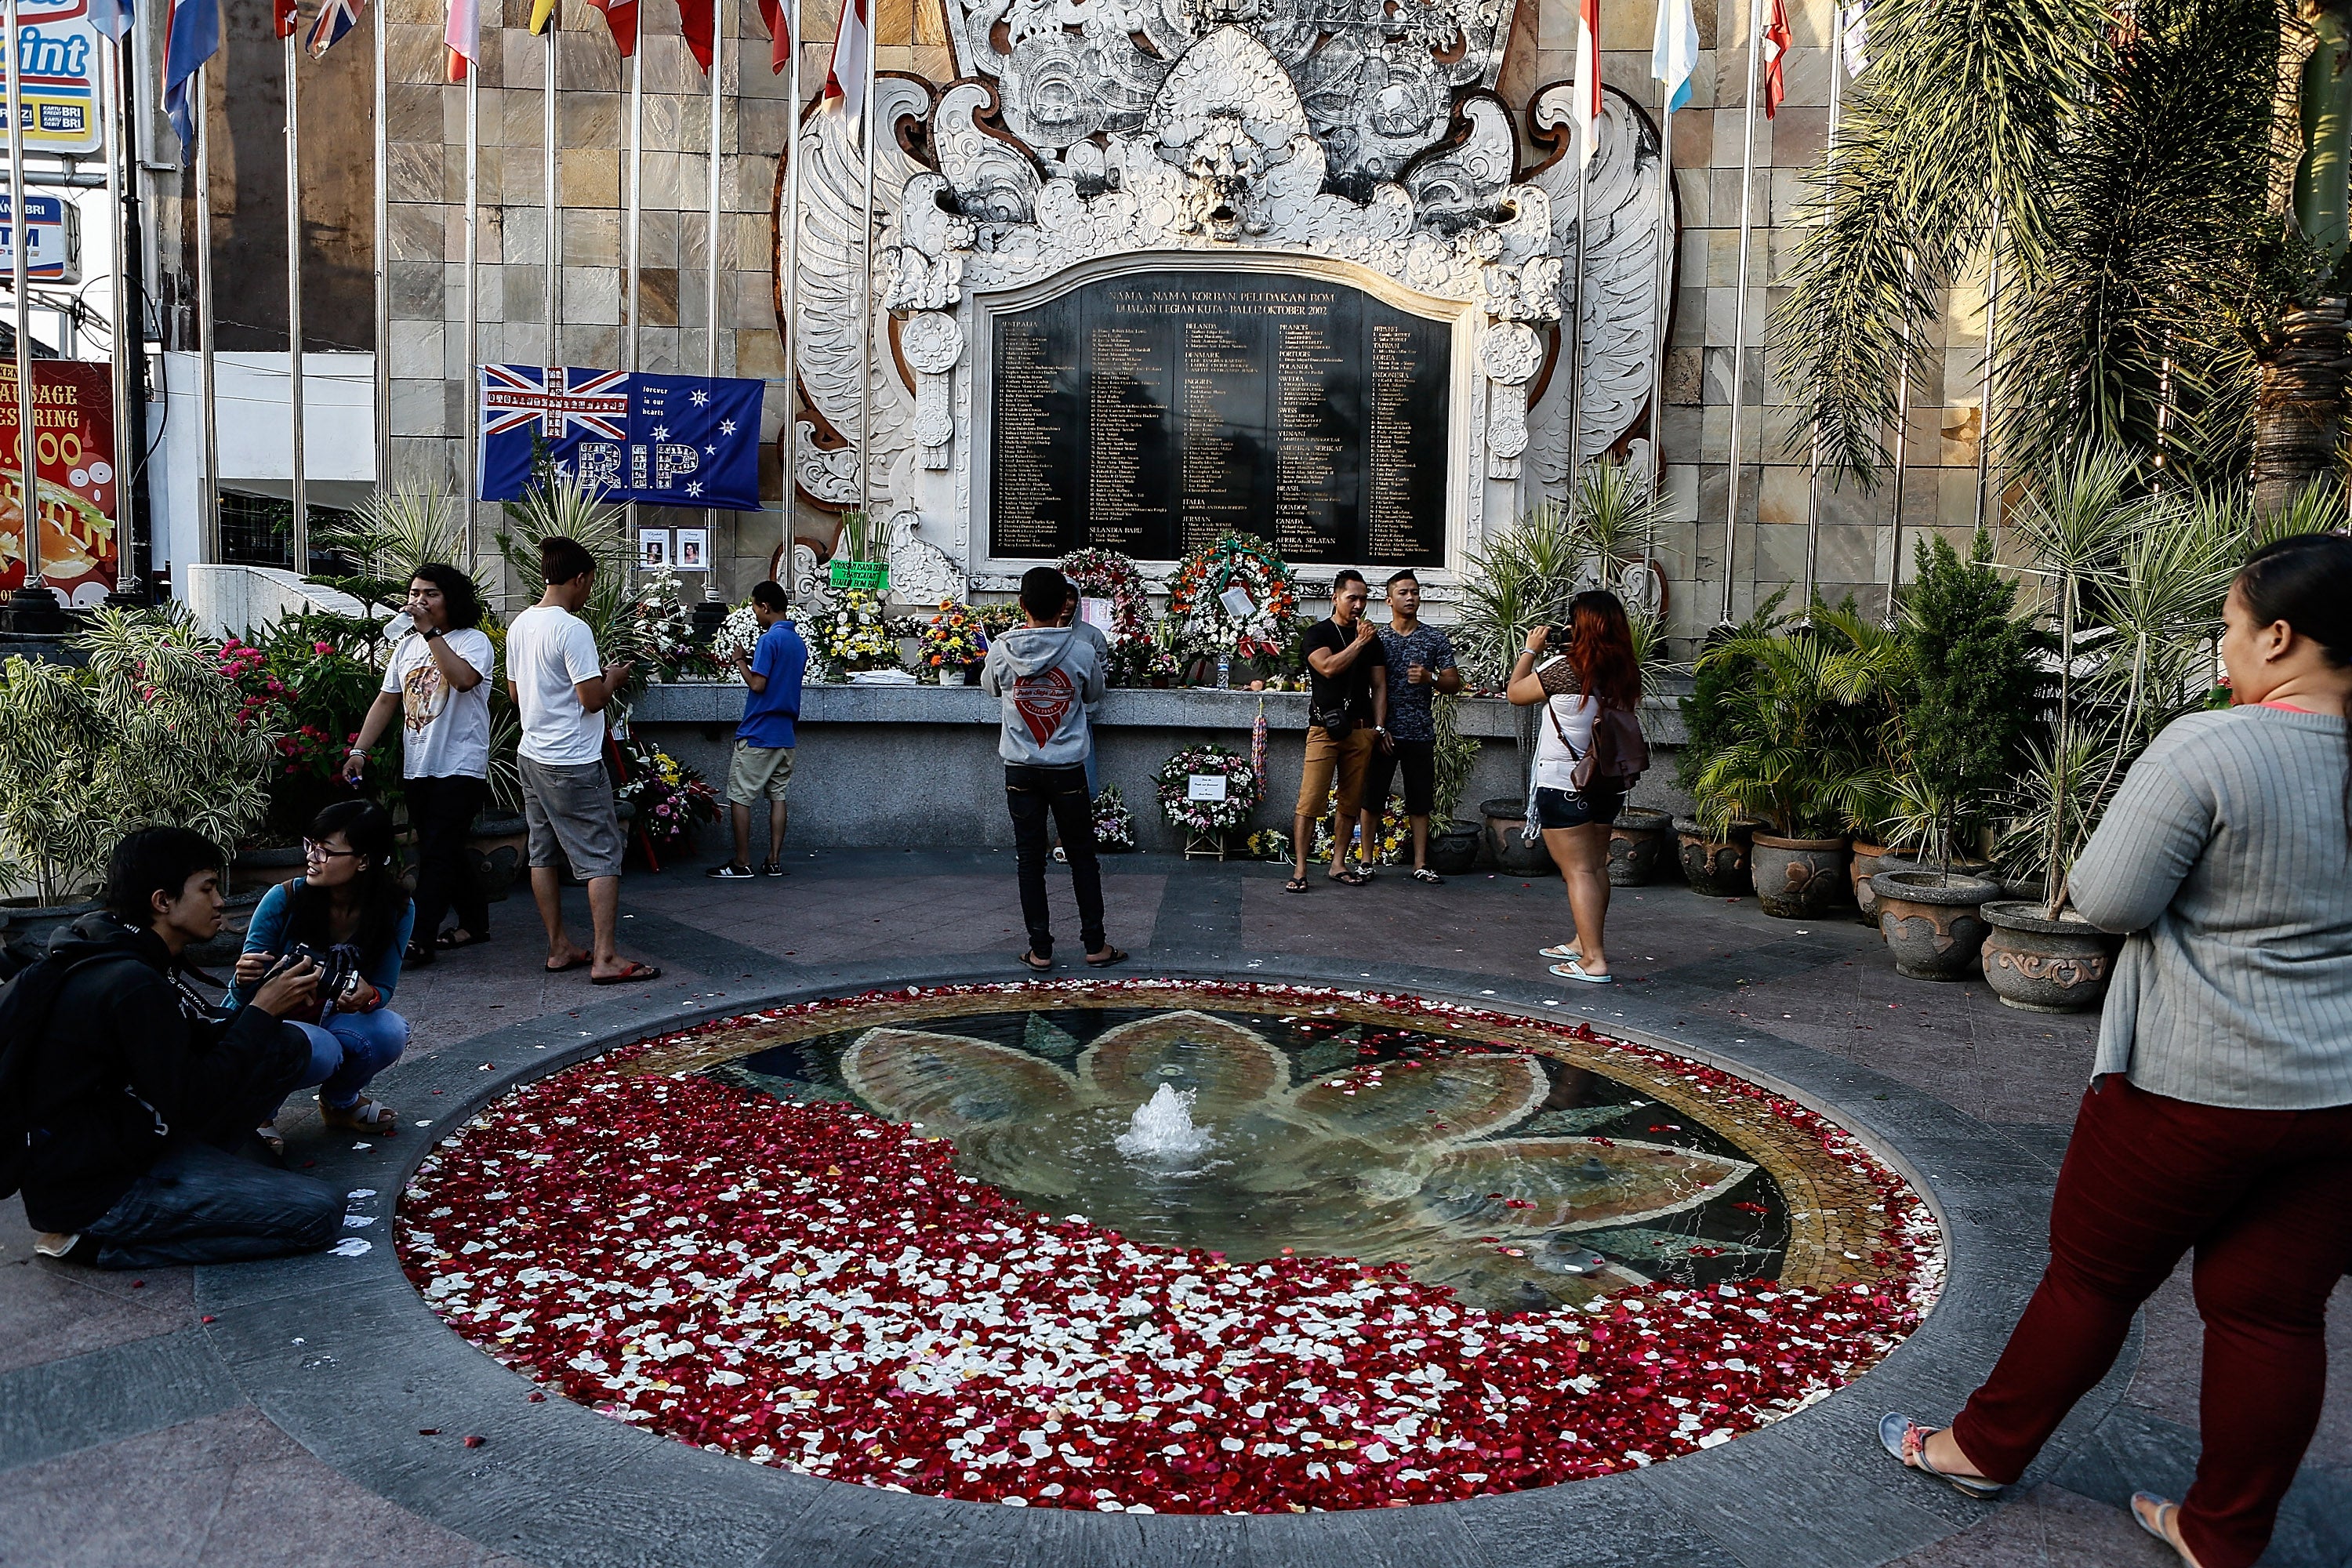 File Image: People gather at the Bali Bombing Memorial Monument on 12 October 2013 in Kuta, Bali, Indonesia. People gathered at various memorial ceremonies today to remember the victims of the 2002 Kuta nightclub bombings which killed 202 people